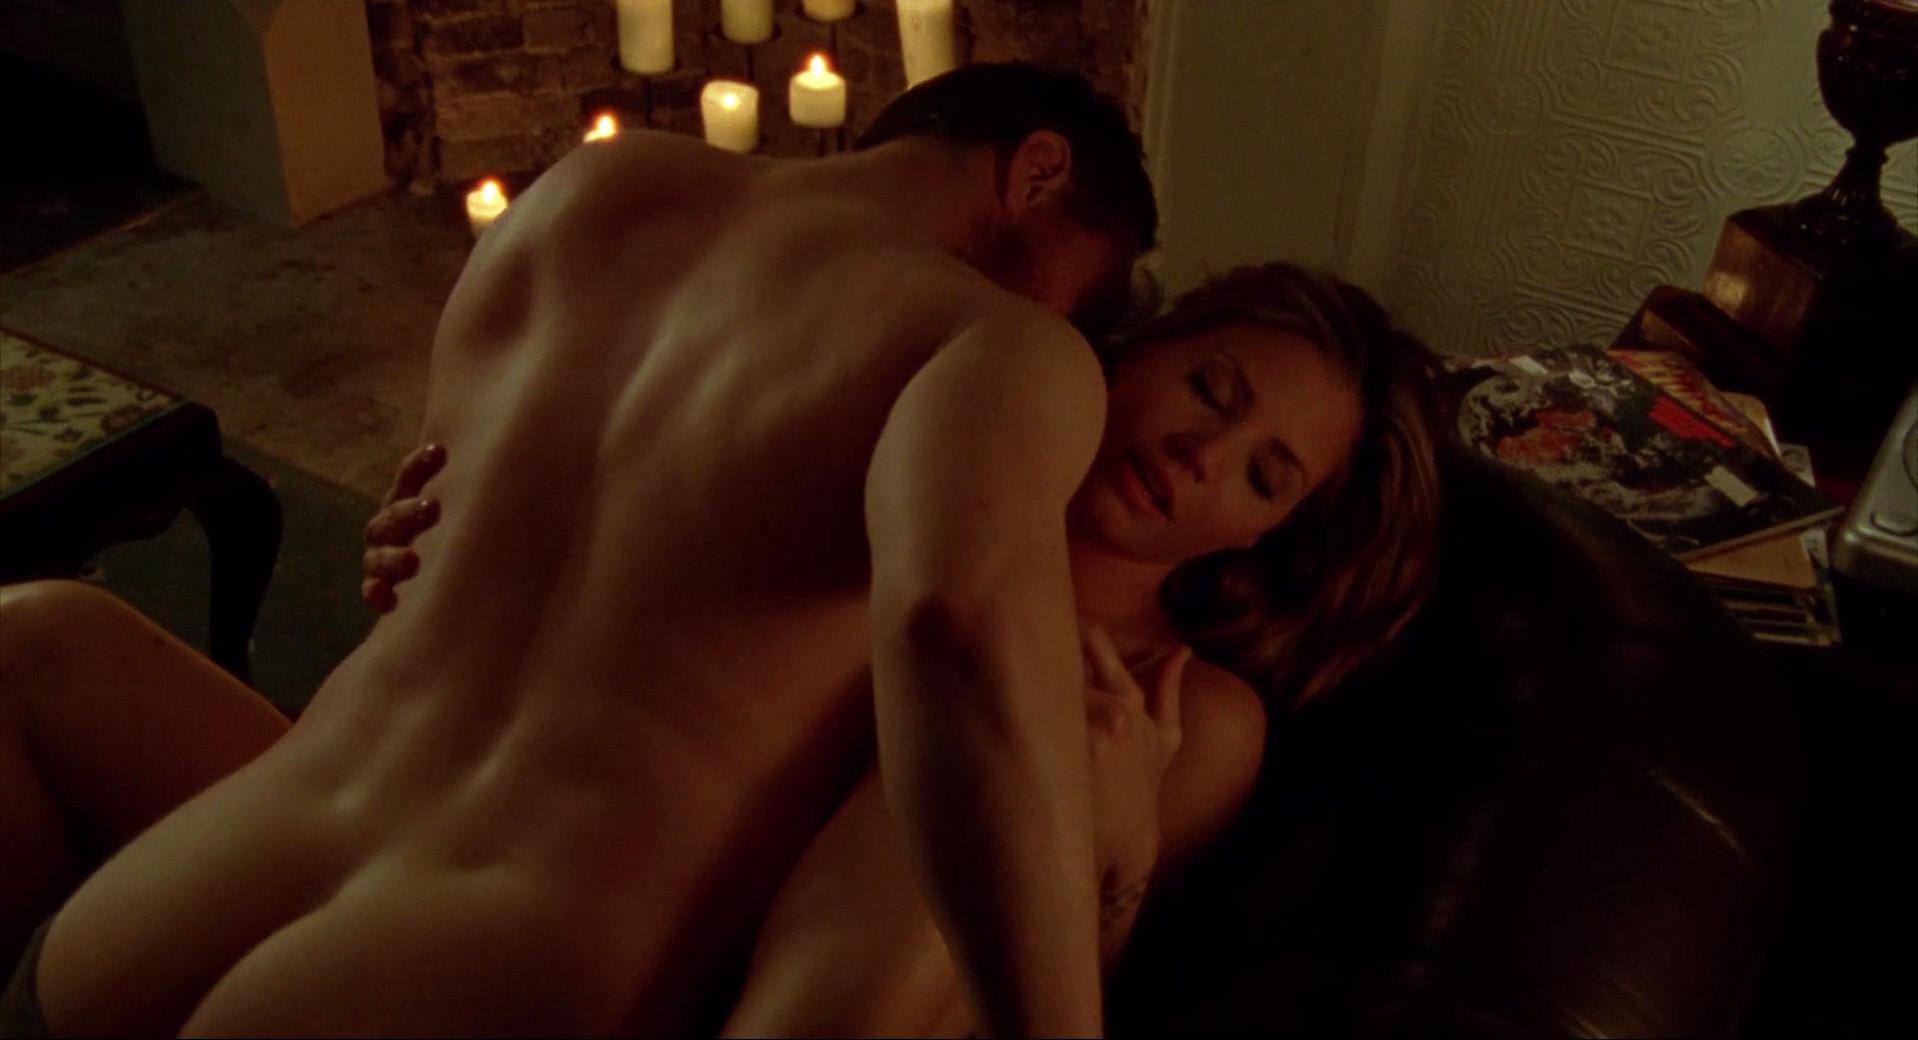 There is not so much nudity but Charisma Carpenter looks pretty hot in sex scene...